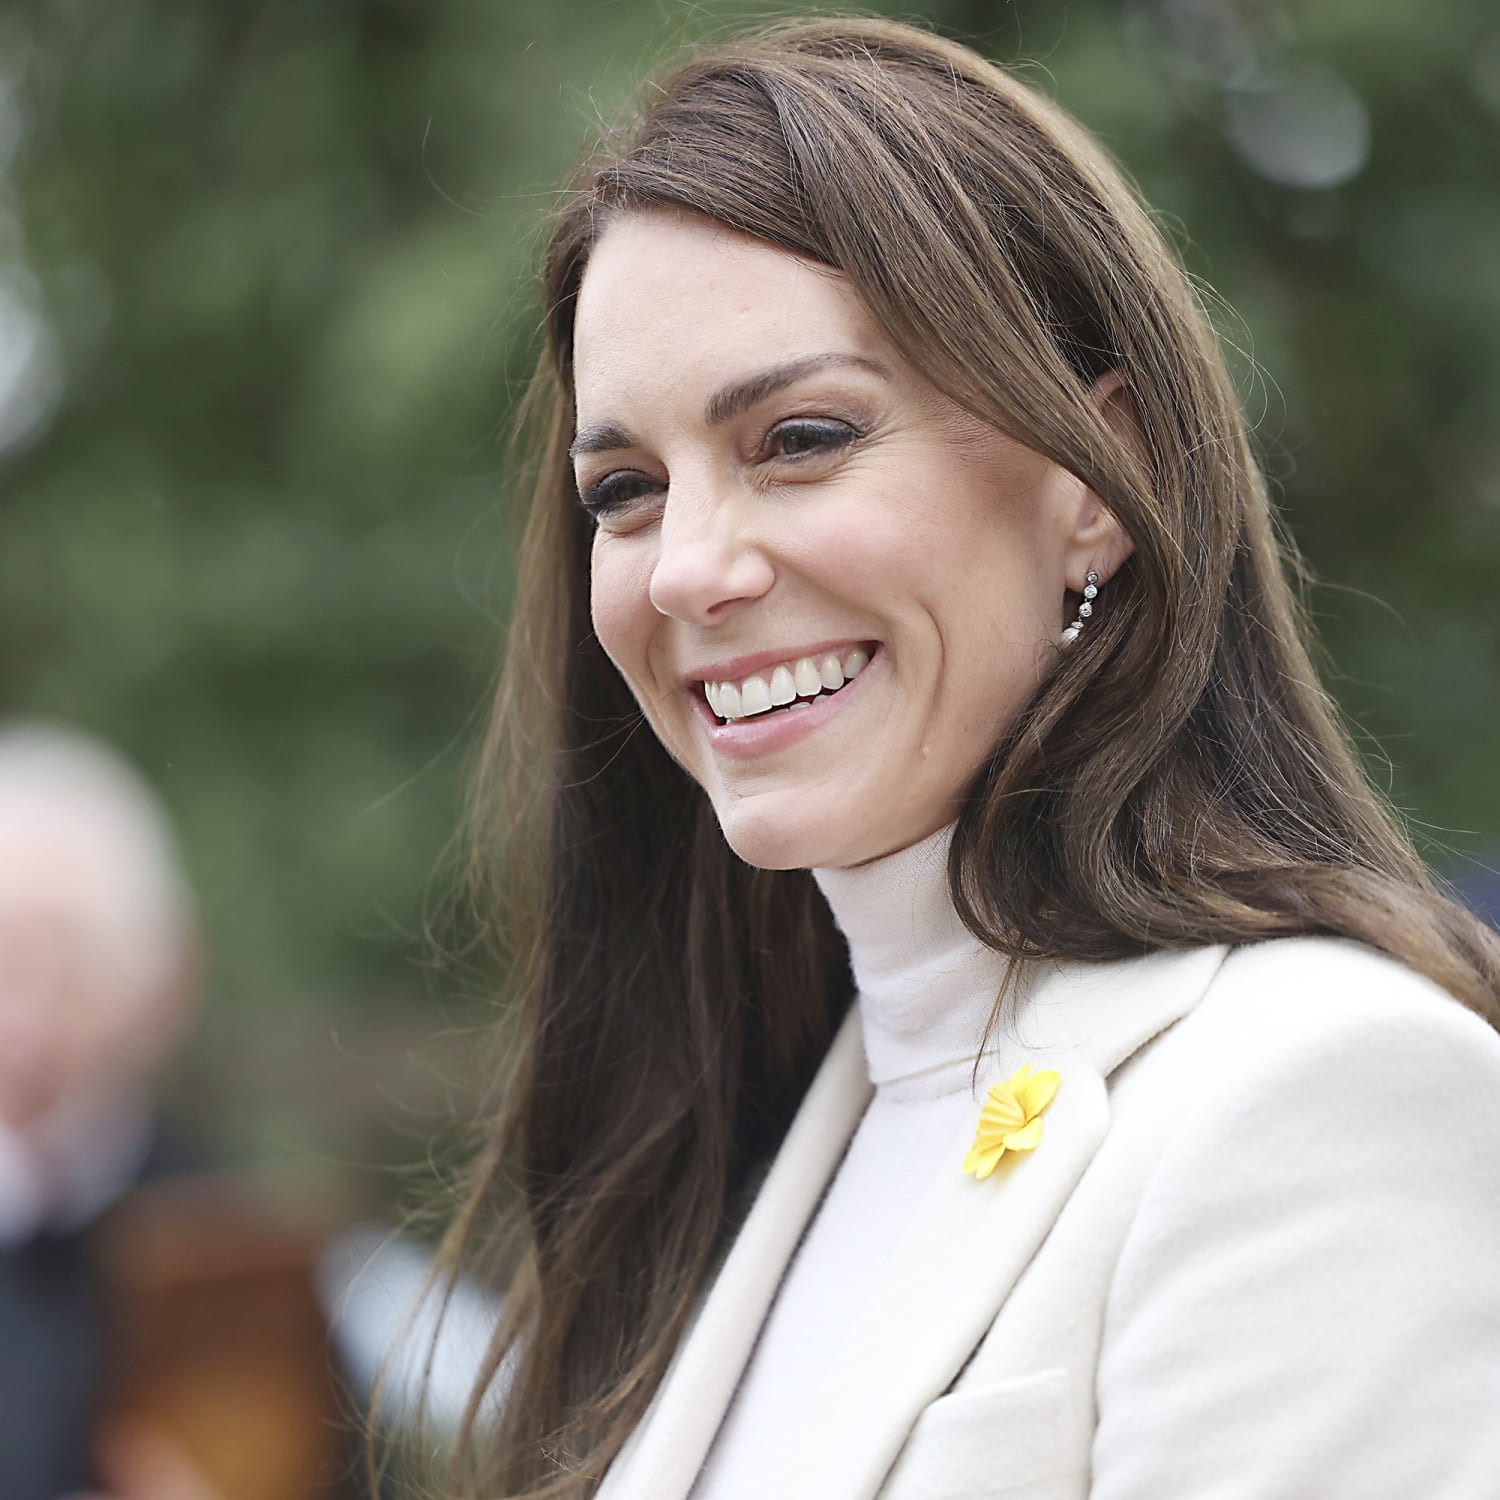 The royals share a photo of Kate Middleton and all three children on Mother’s Day in the UK